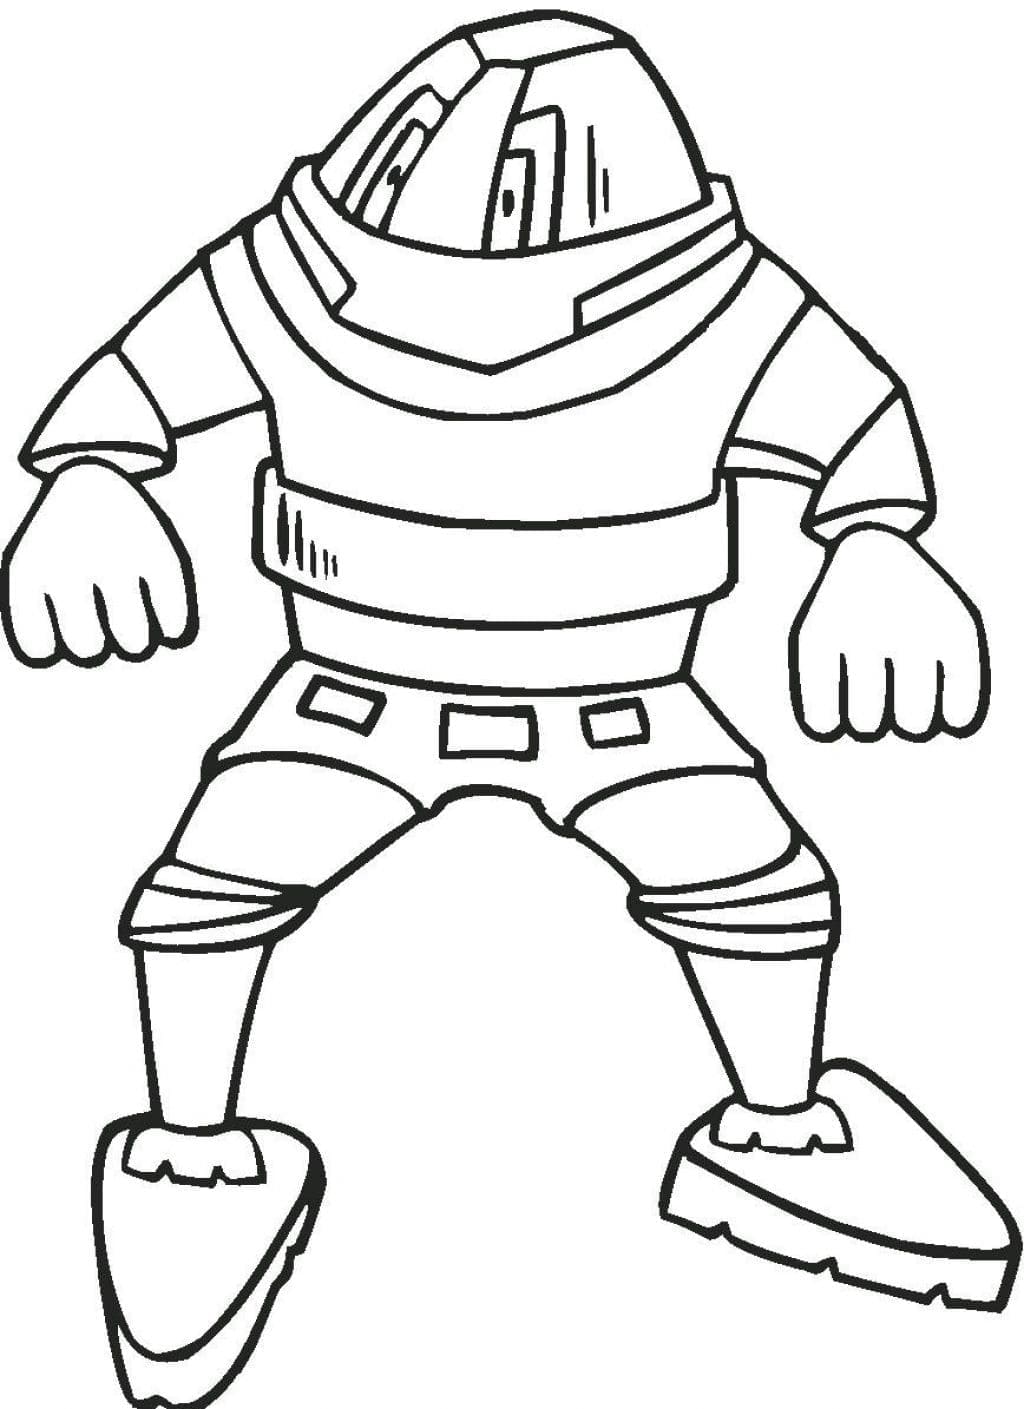 Robot Incroyable coloring page